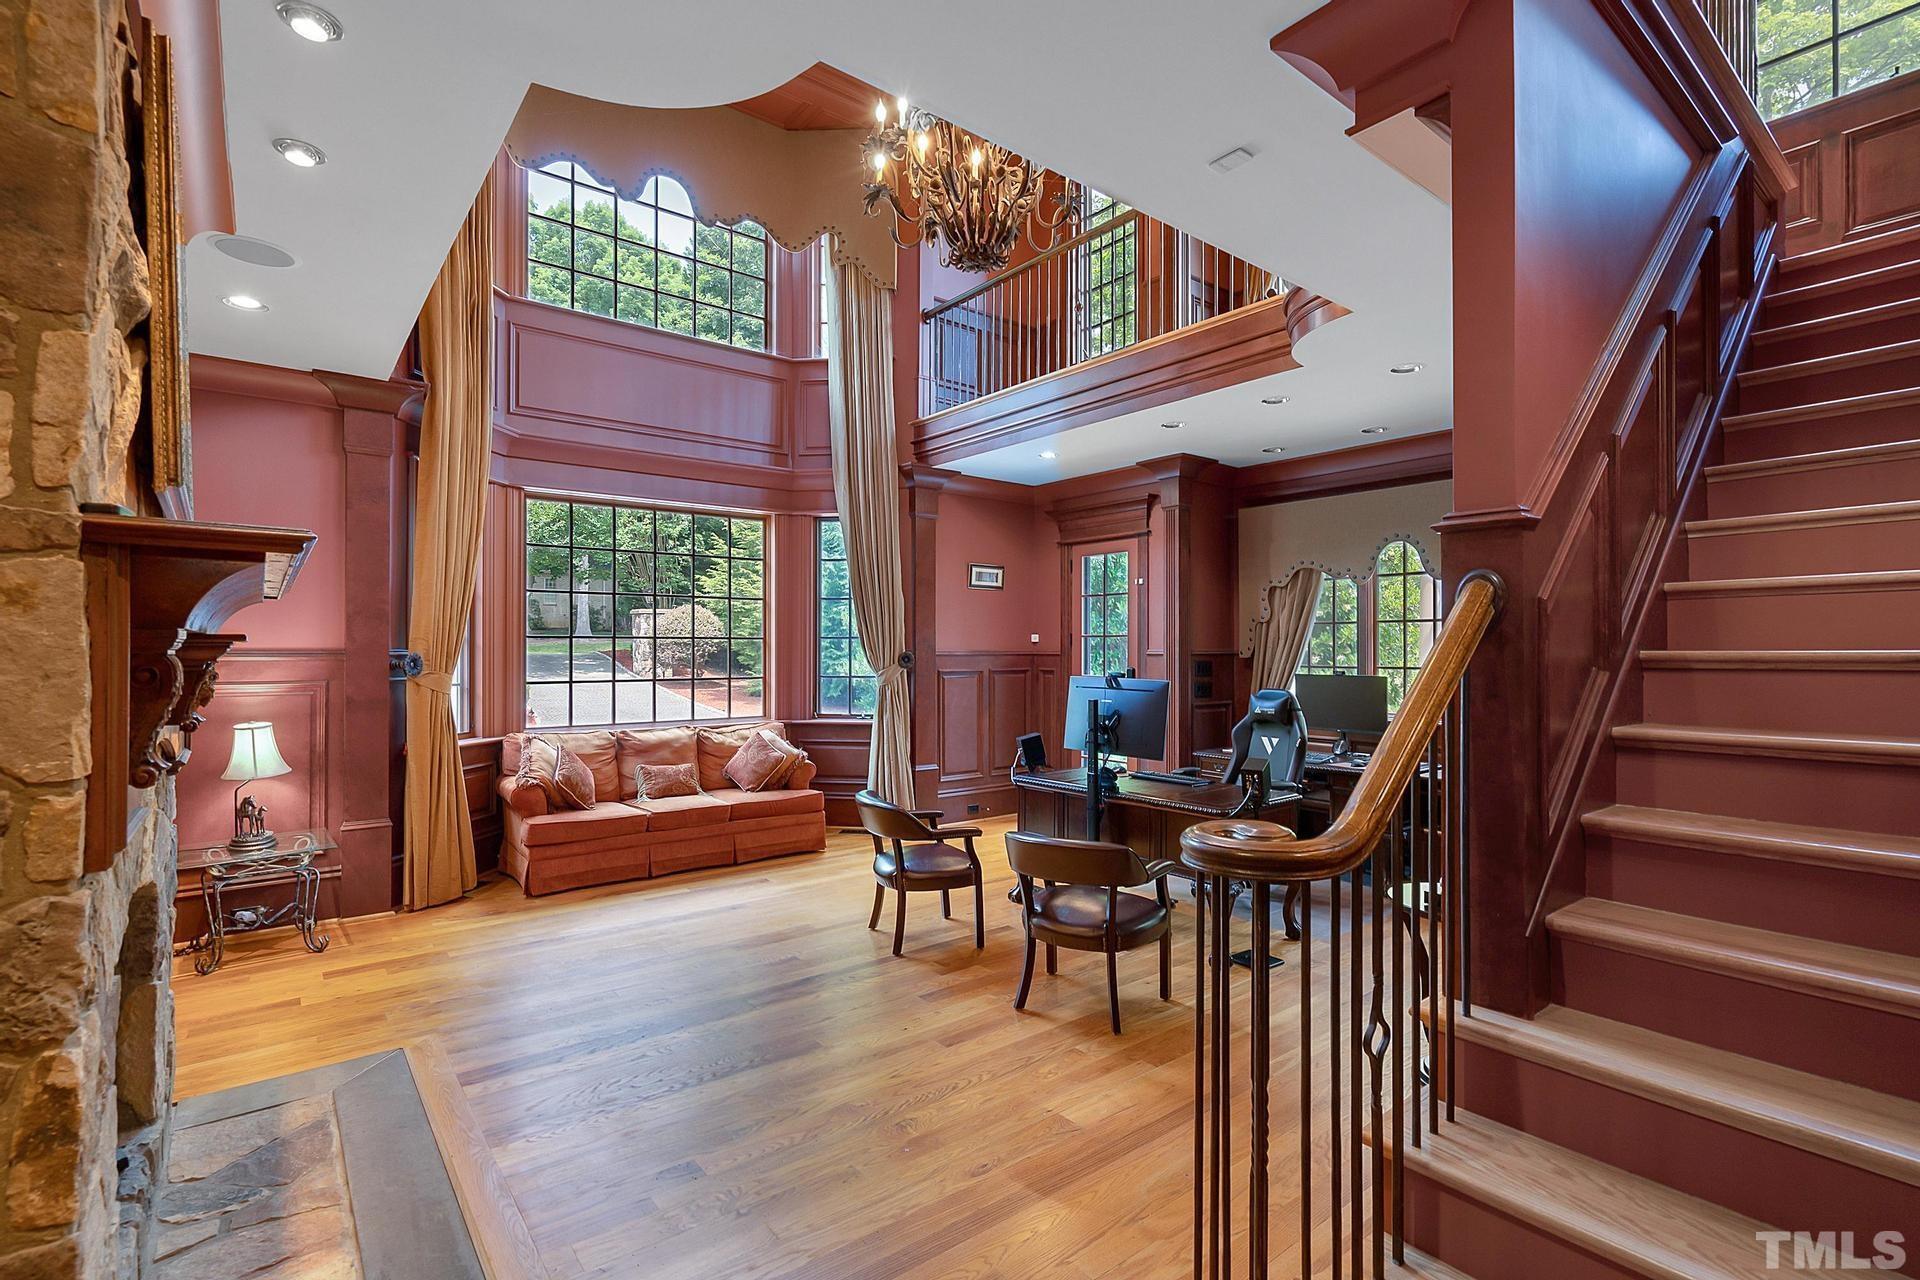 Two story library with private access to the stone patio, a second story mezzanine and secret door access to the hallway.